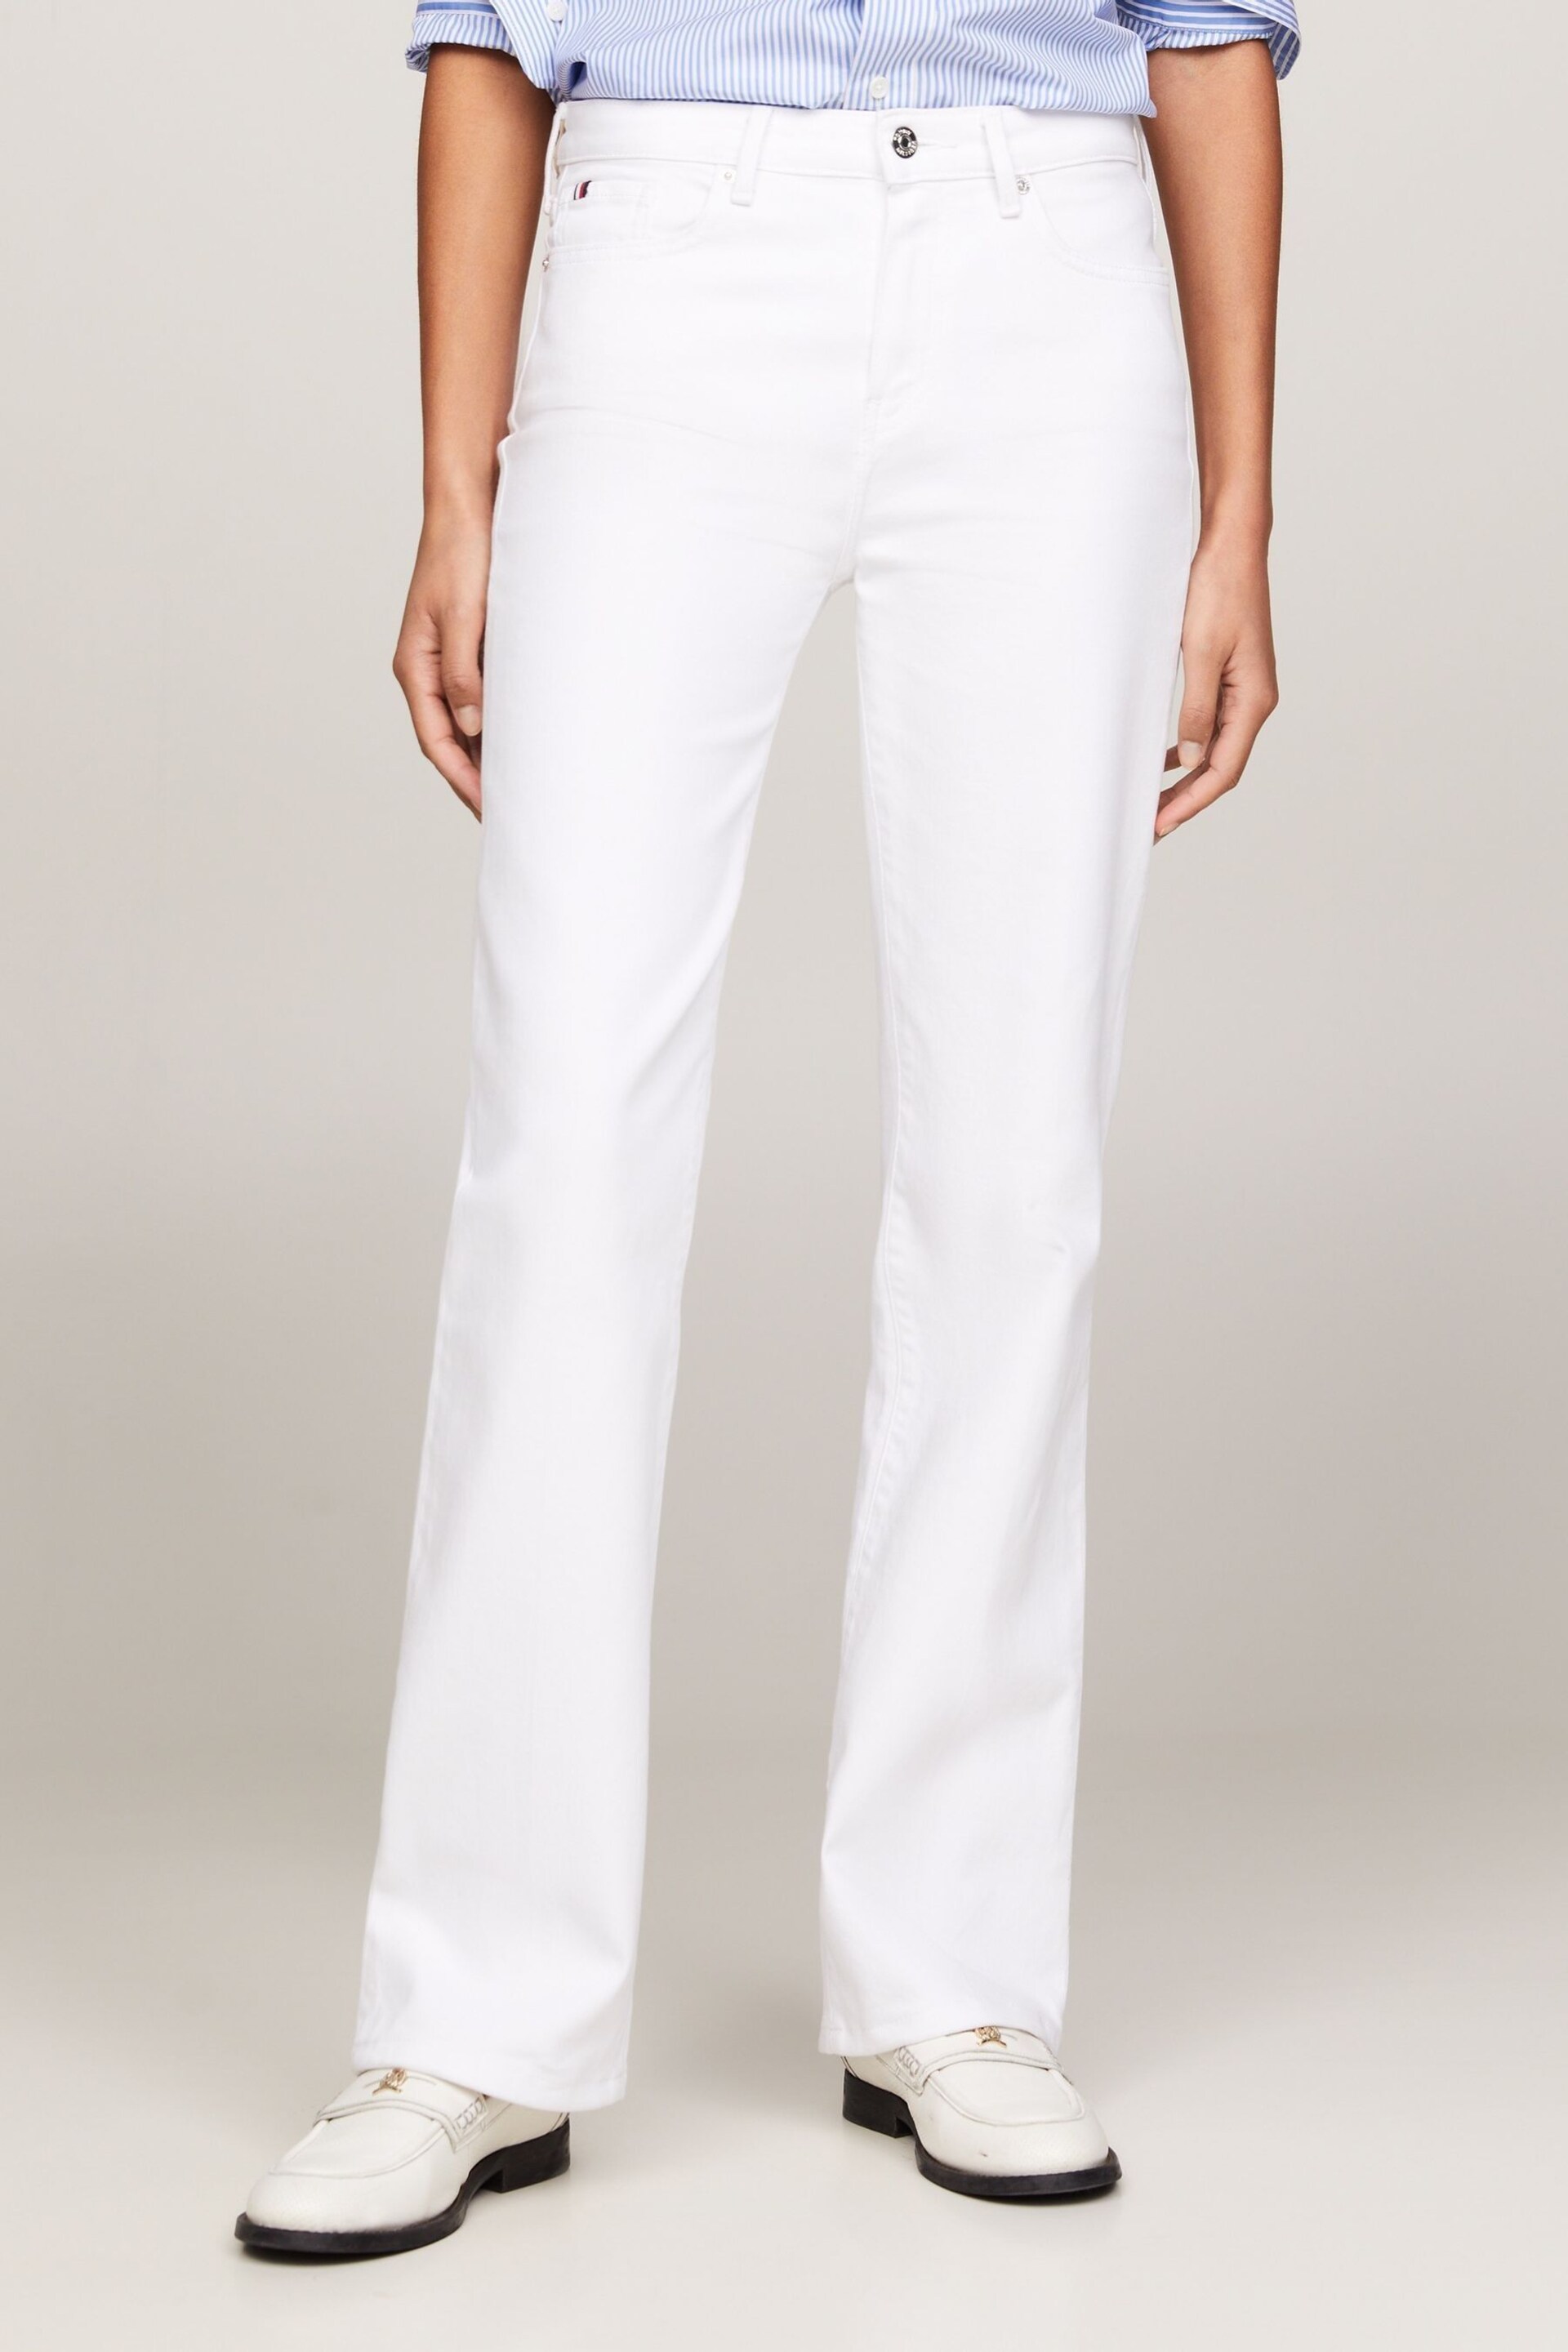 Tommy Hilfiger Bootcut White Jeans - Image 3 of 5